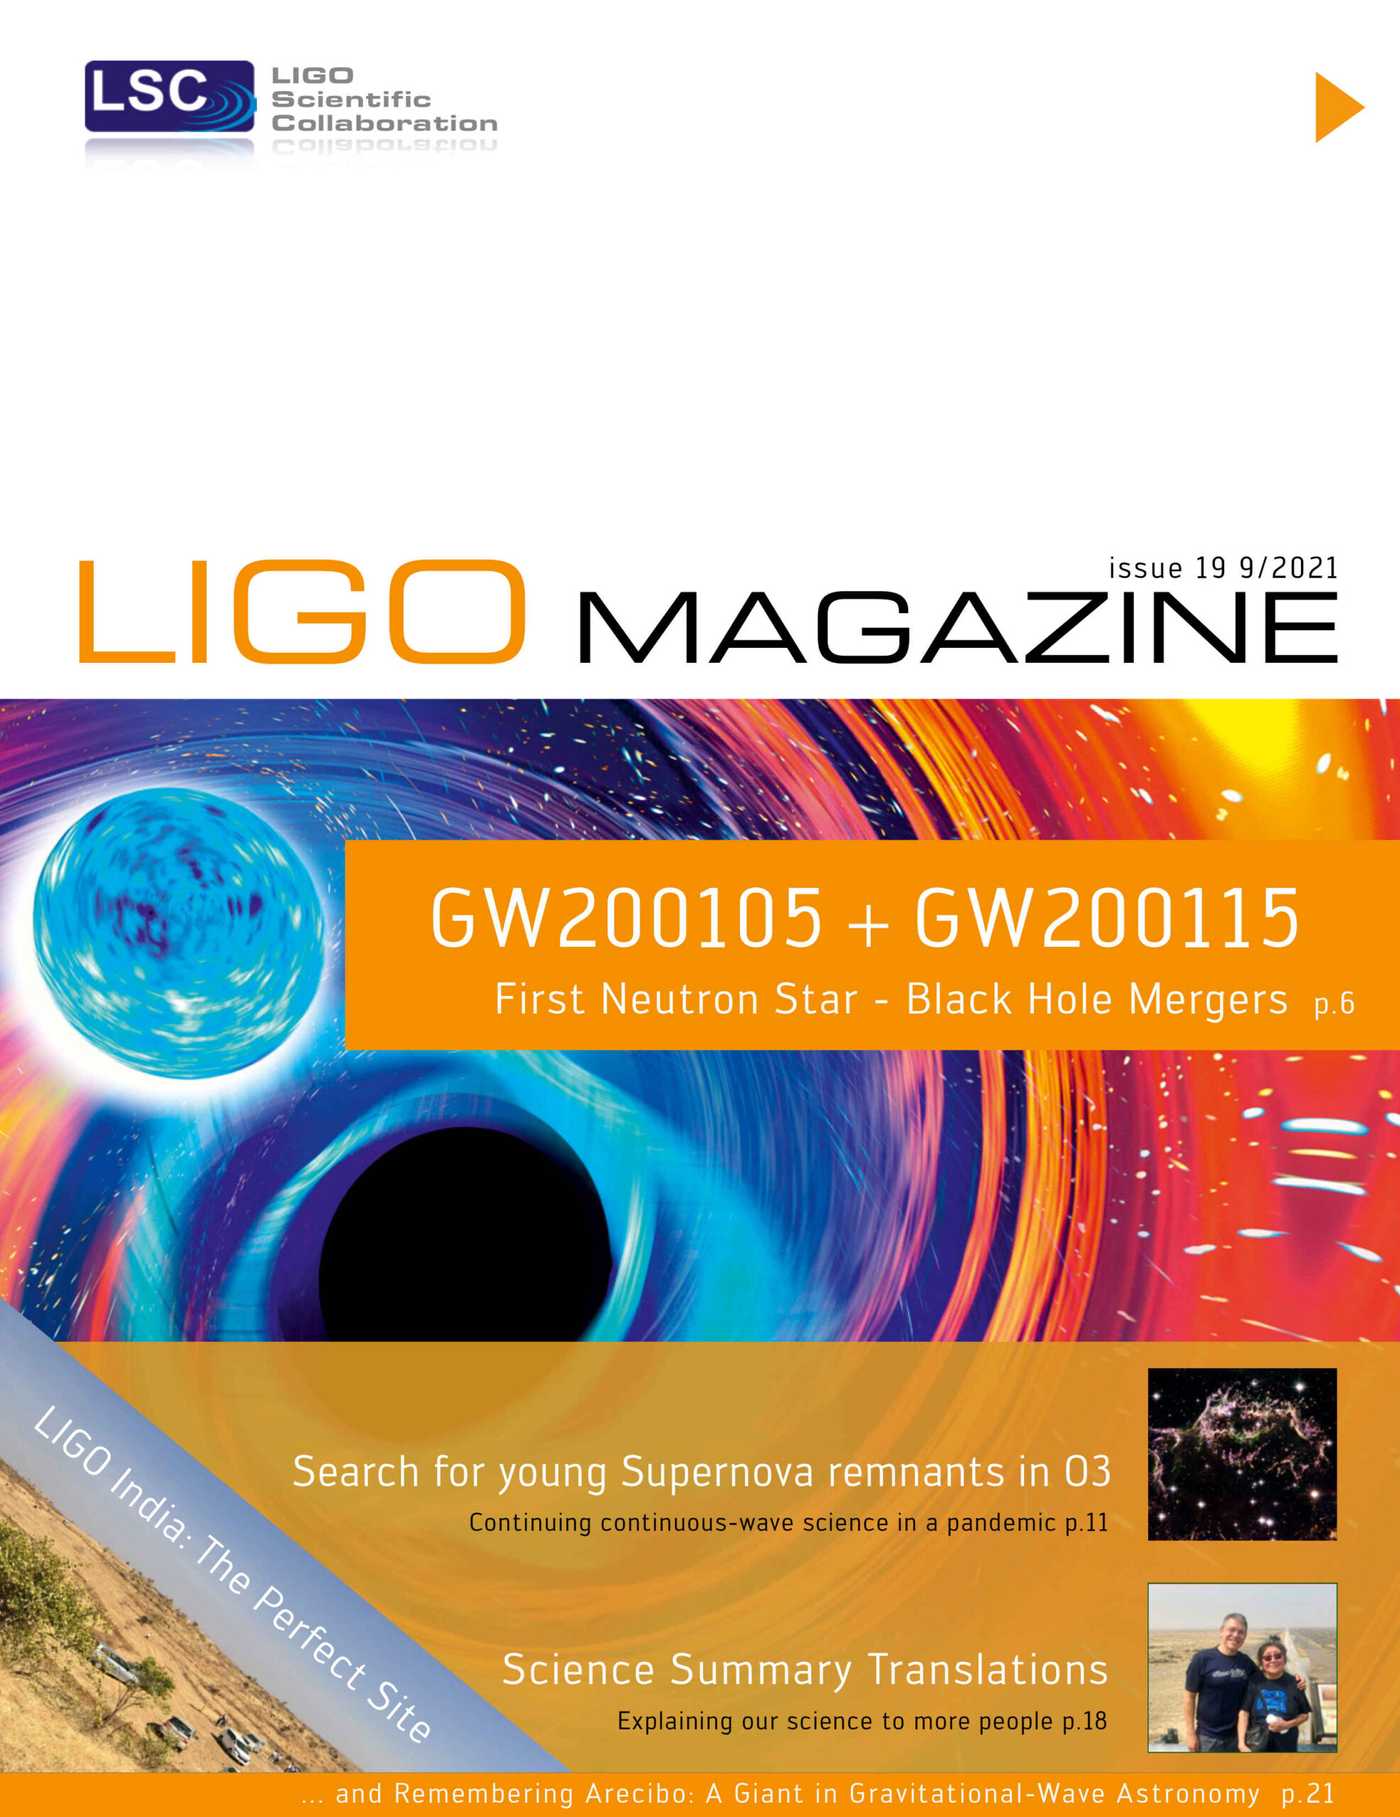 News-Image 12 of: New LIGO Magazine Issue 19 is out